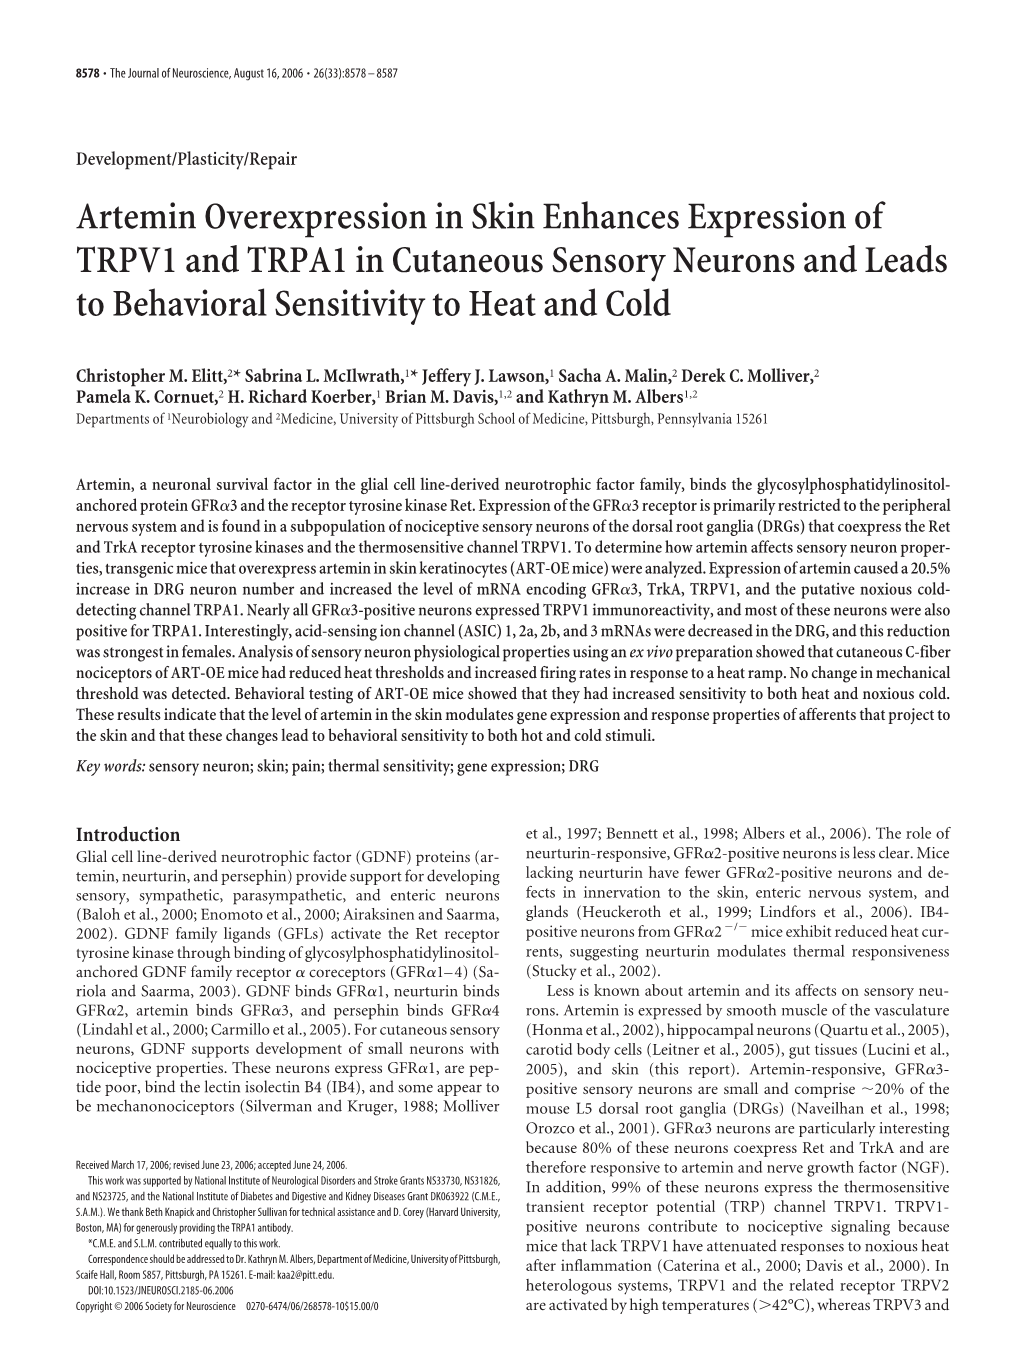 Artemin Overexpression in Skin Enhances Expression of TRPV1 and TRPA1 in Cutaneous Sensory Neurons and Leads to Behavioral Sensitivity to Heat and Cold